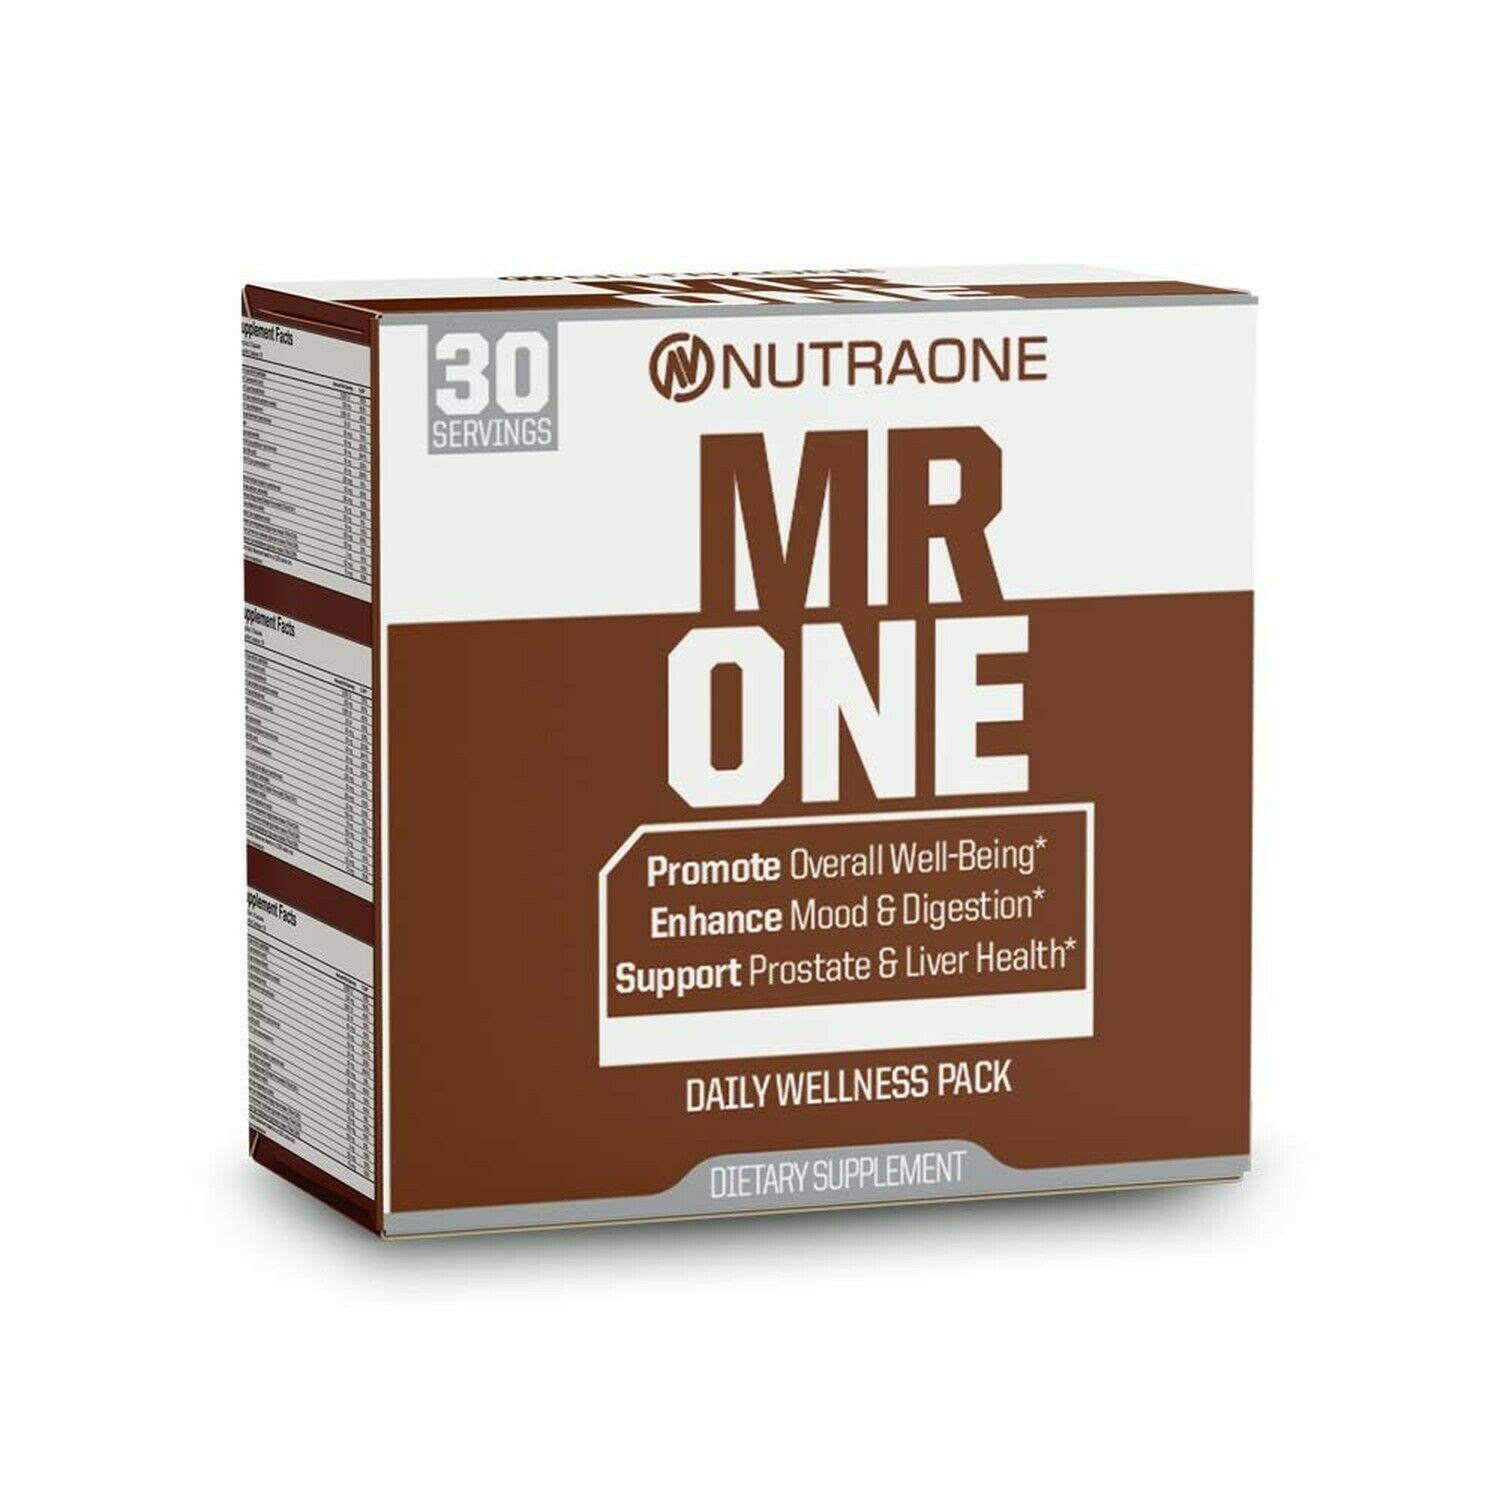 Mrone Daily Vitamin Packs for Men by NutraOne – Men’s Daily Vitamins and Supplements Regimen (30 Day Supply)